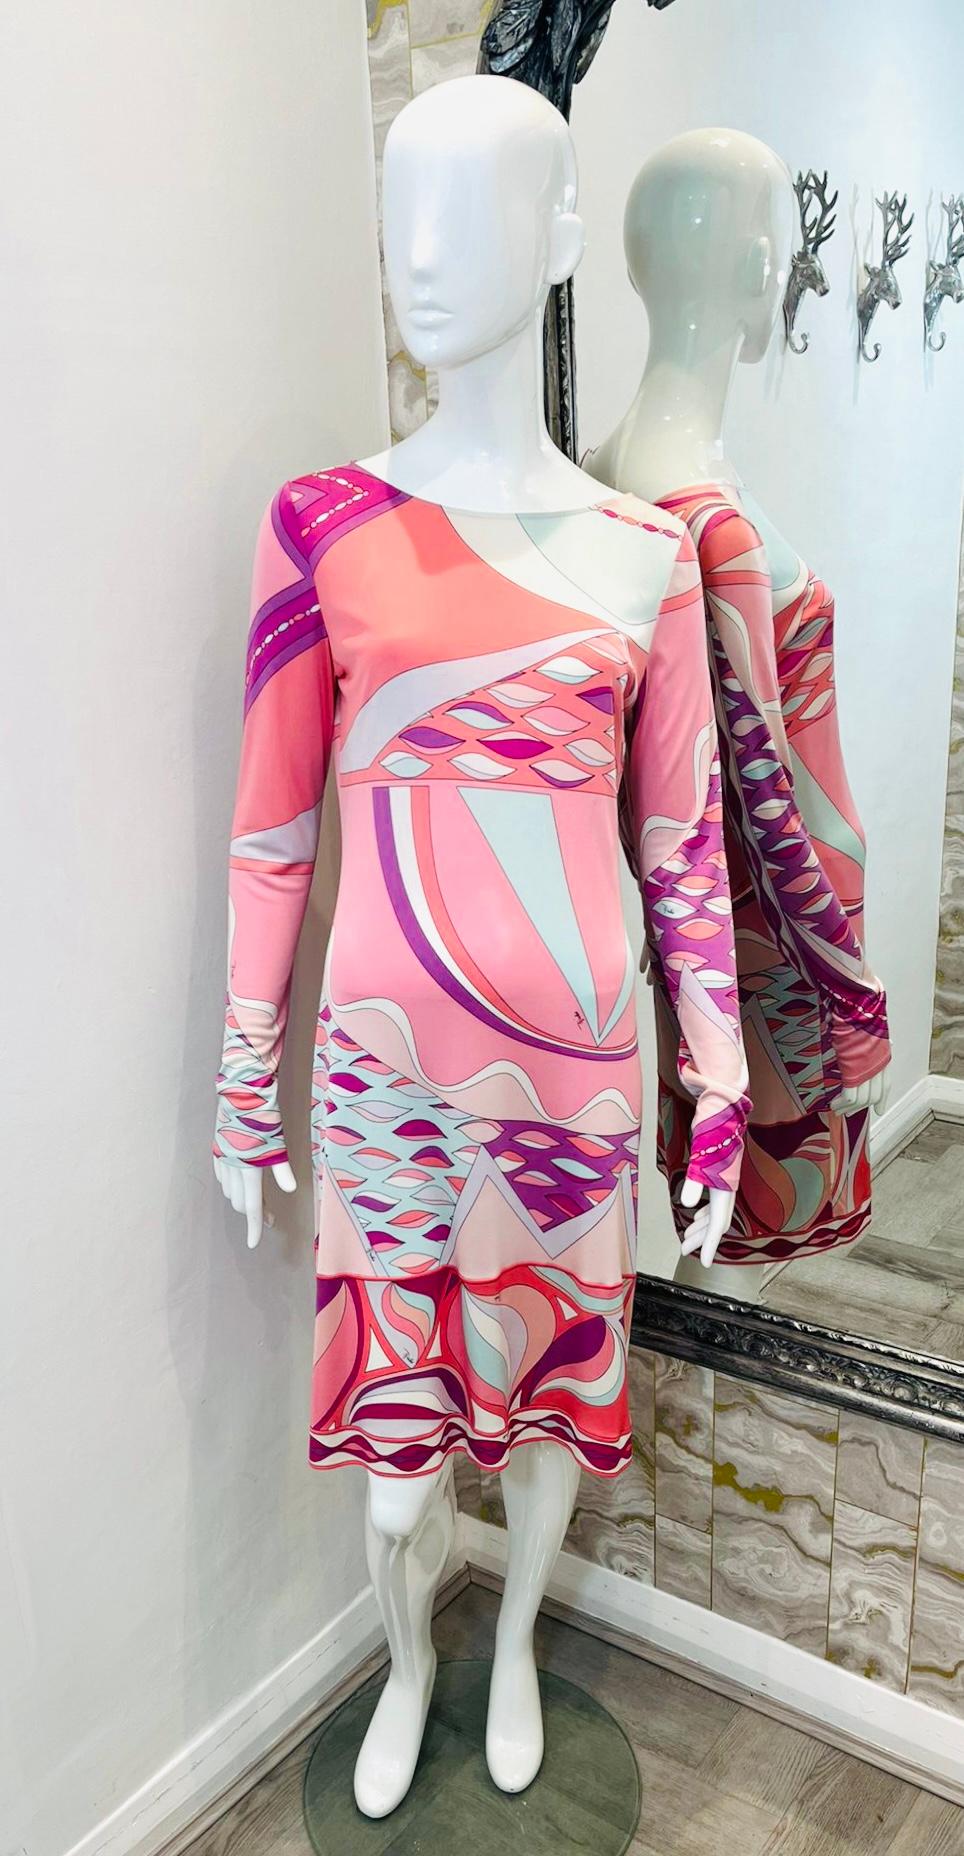 Emilio Pucci Abstract Print Silk Dress

Pink, long sleeved dress designed with the brand's signature abstract prints in white and purple.

Featuring round neckline and above the knee length.

Detailed with open back and gold logo embroidered